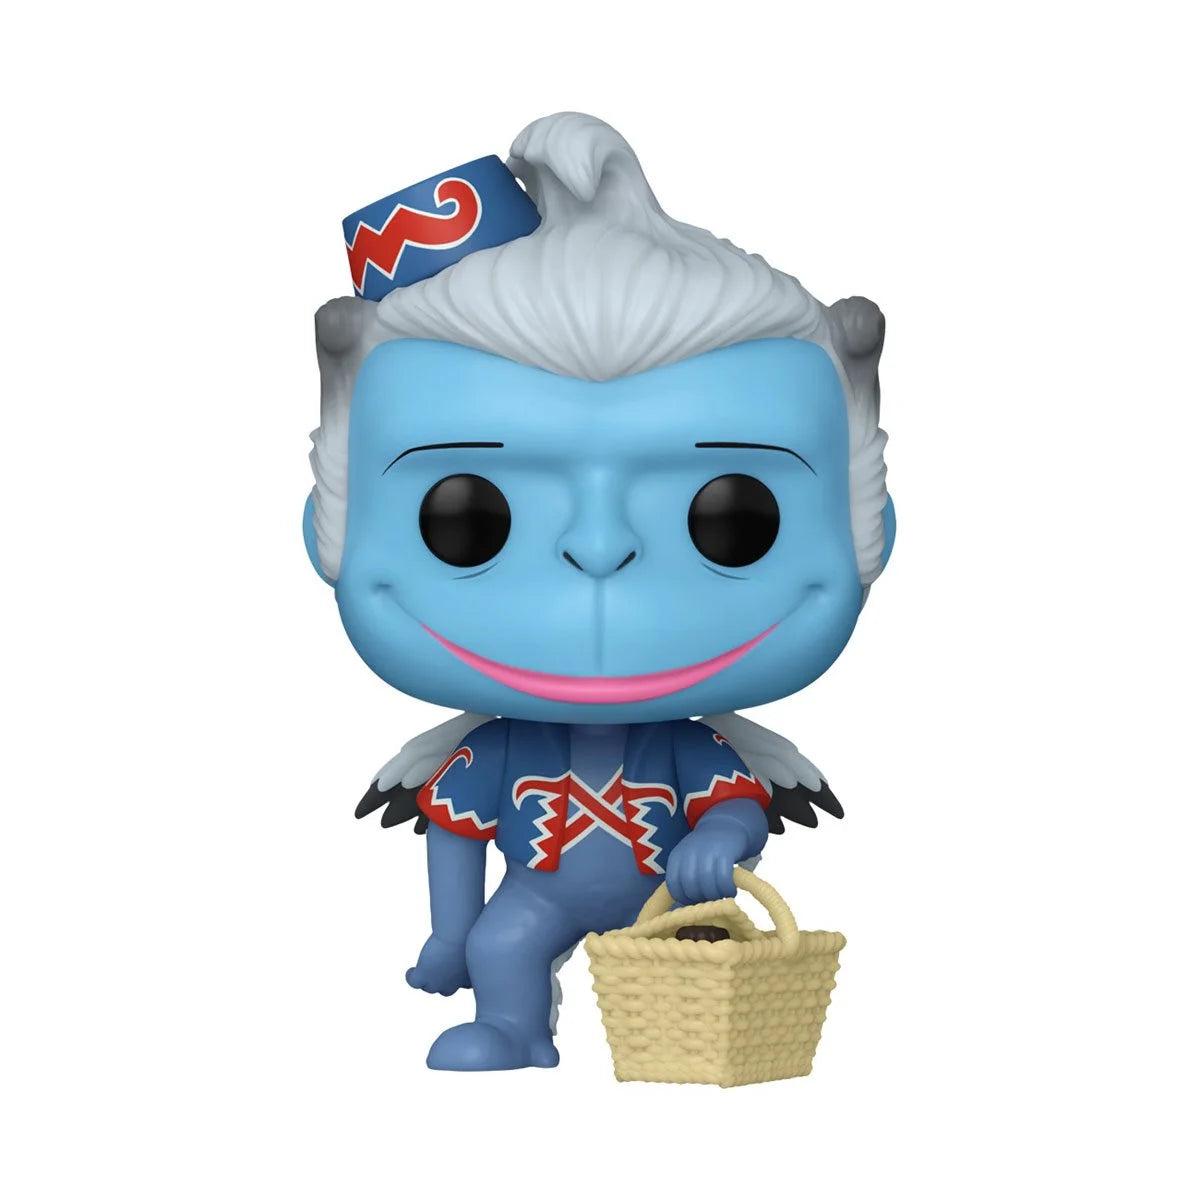 Funko Pop! The Wizard of Oz 85th Anniversary Winged Monkey Vinyl Figure #1520 - Specialty Series